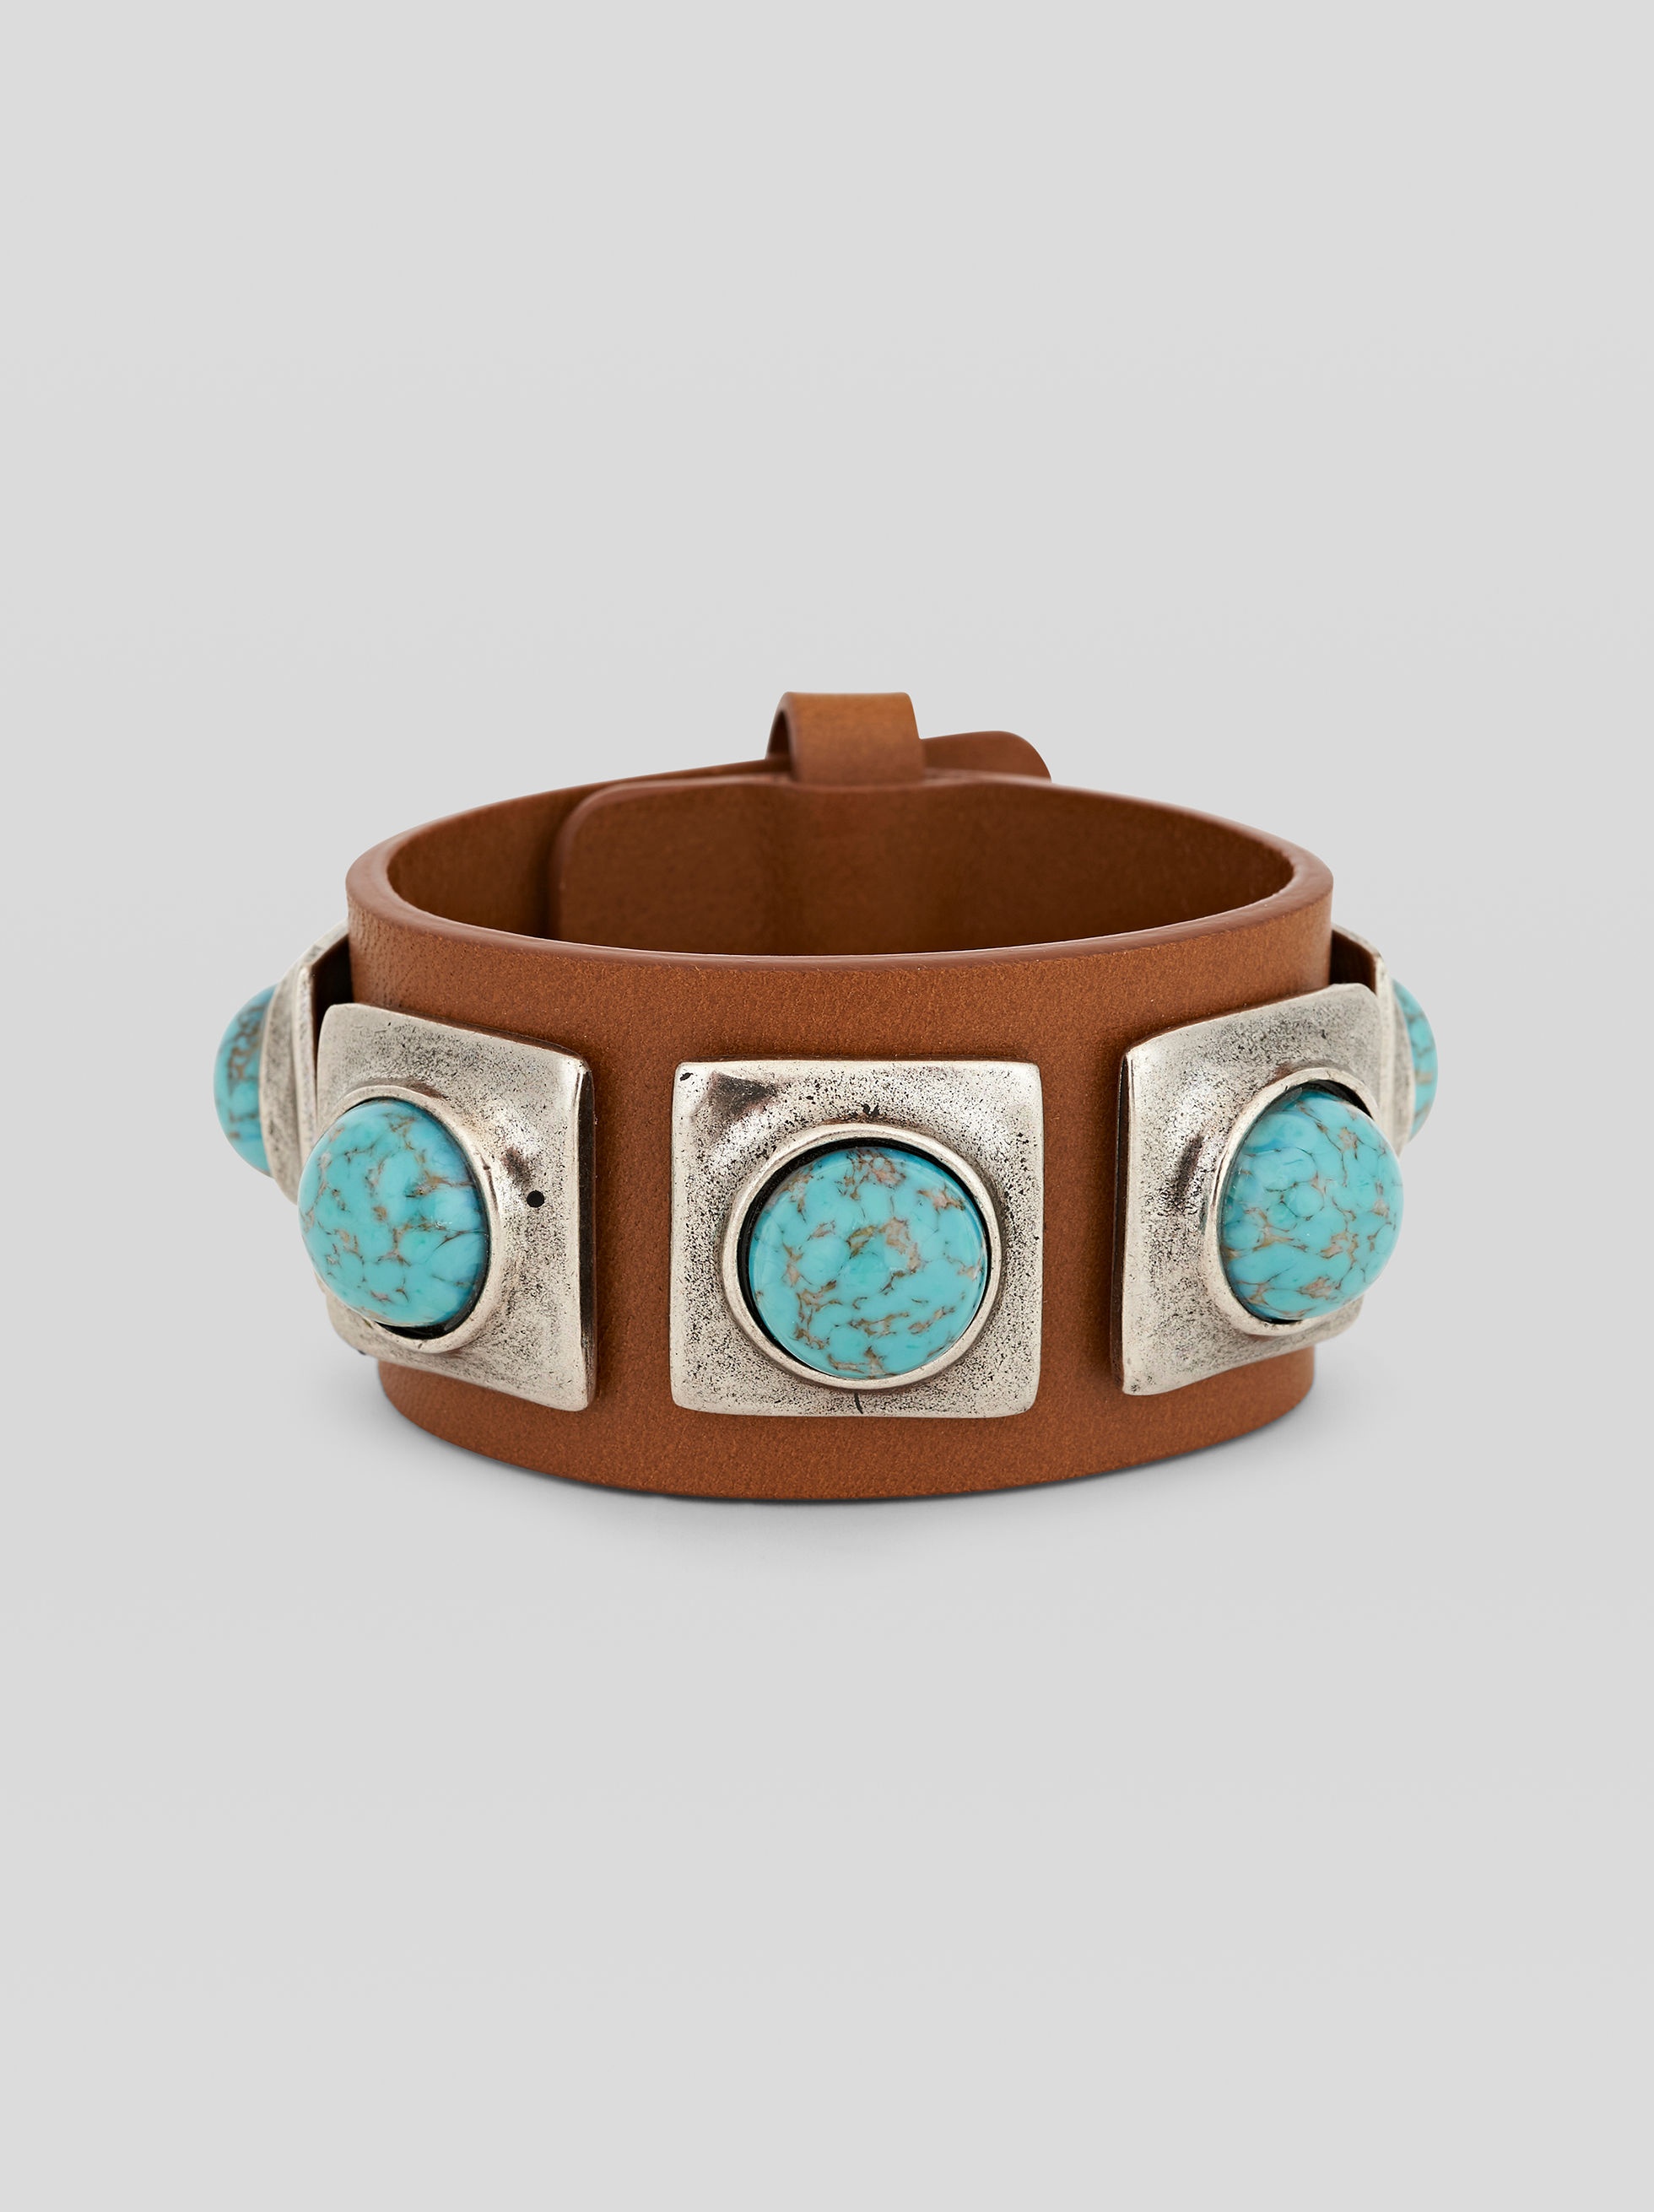 MAXI LEATHER BRACELET WITH STUDS AND STONES - 1